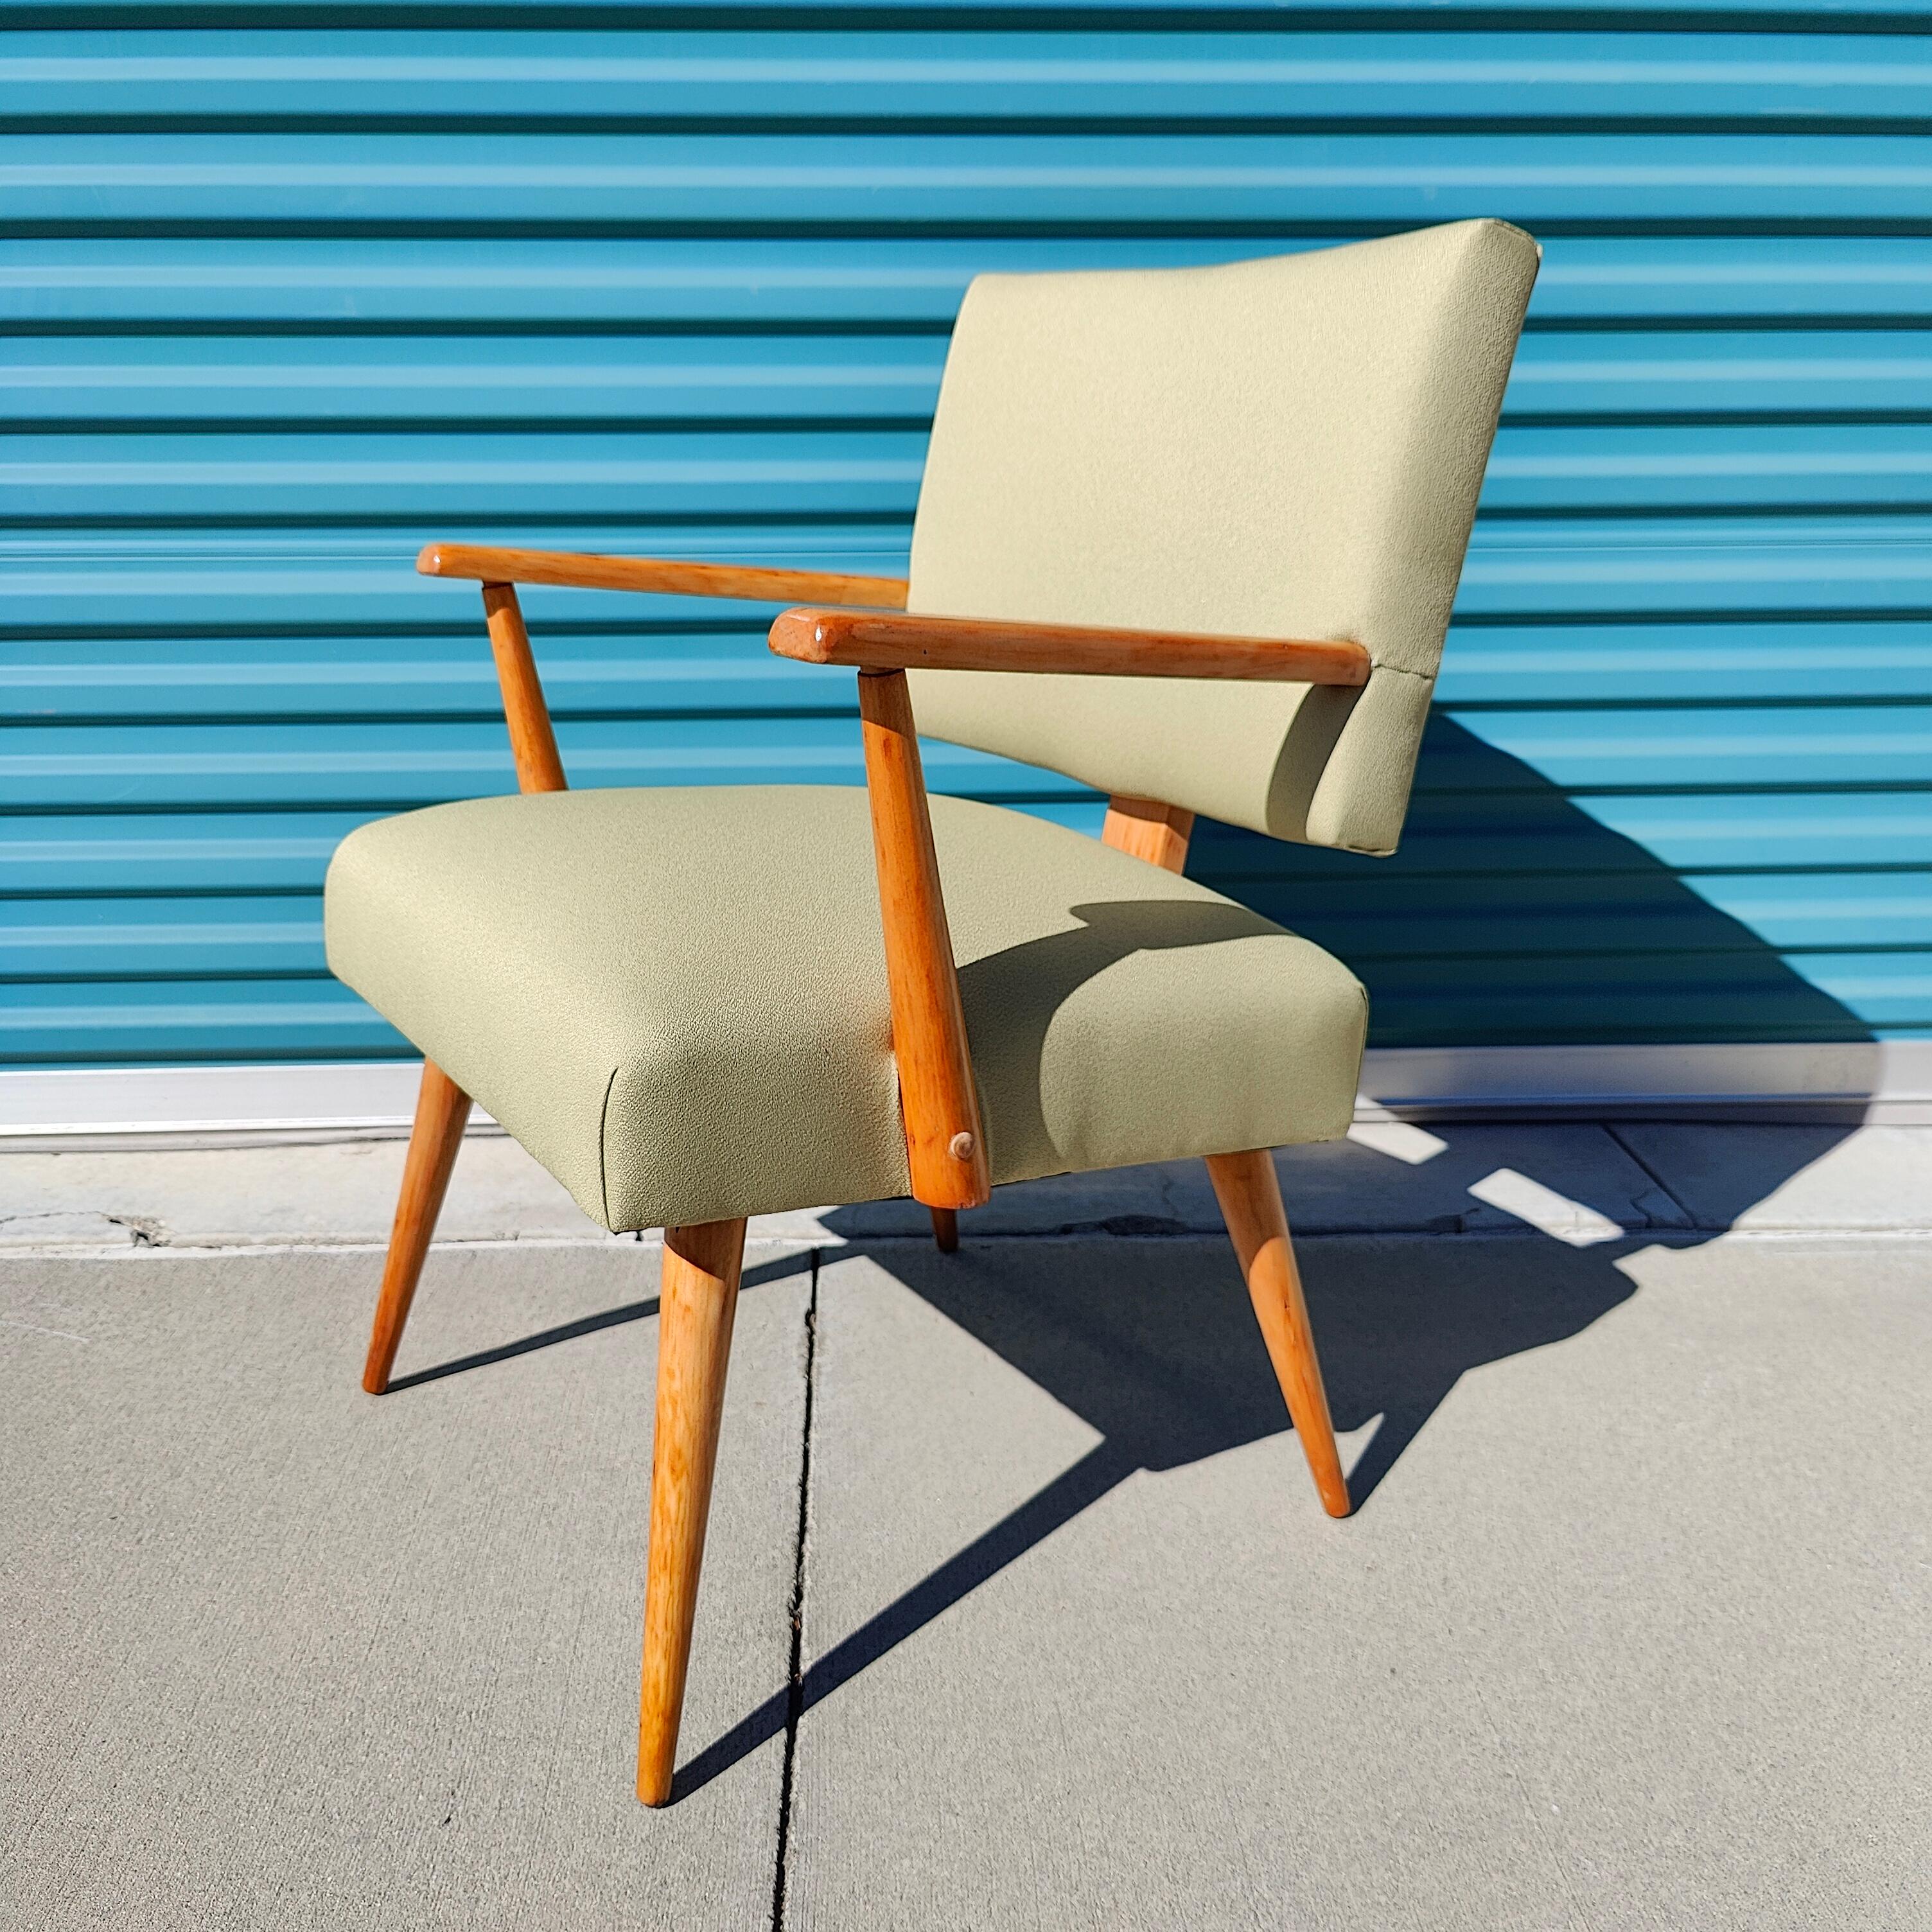 American Small Vintage Mid-Century Modern Lounge Chair For Sale